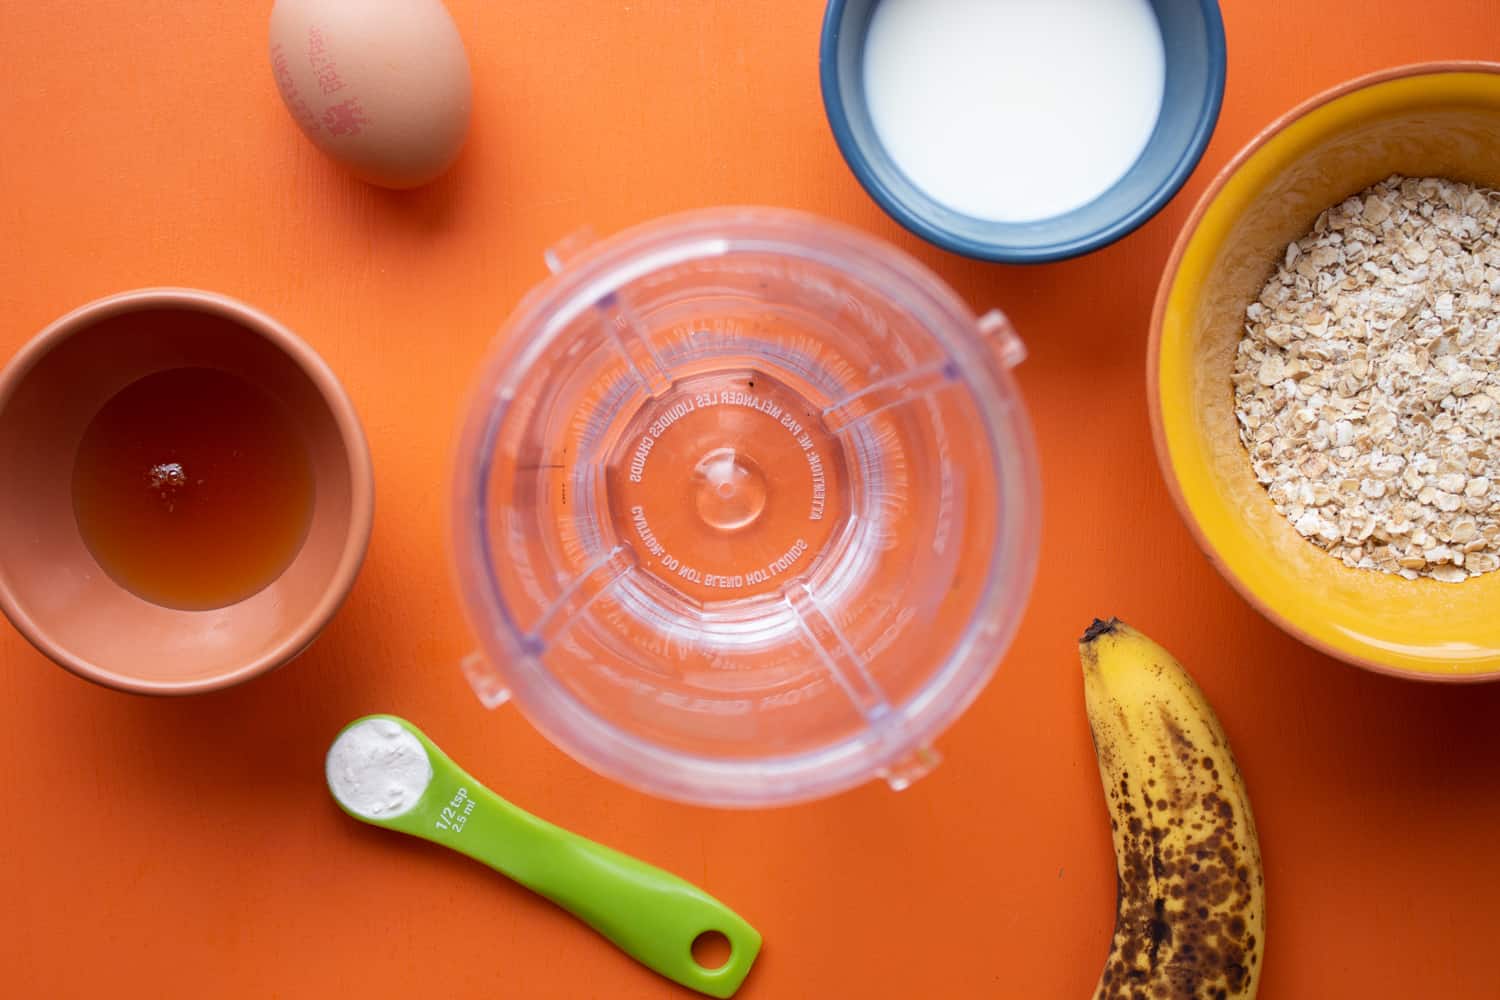 Ingredients including honey, banana, eggs, oats and milk around a blender cup on an orange background.